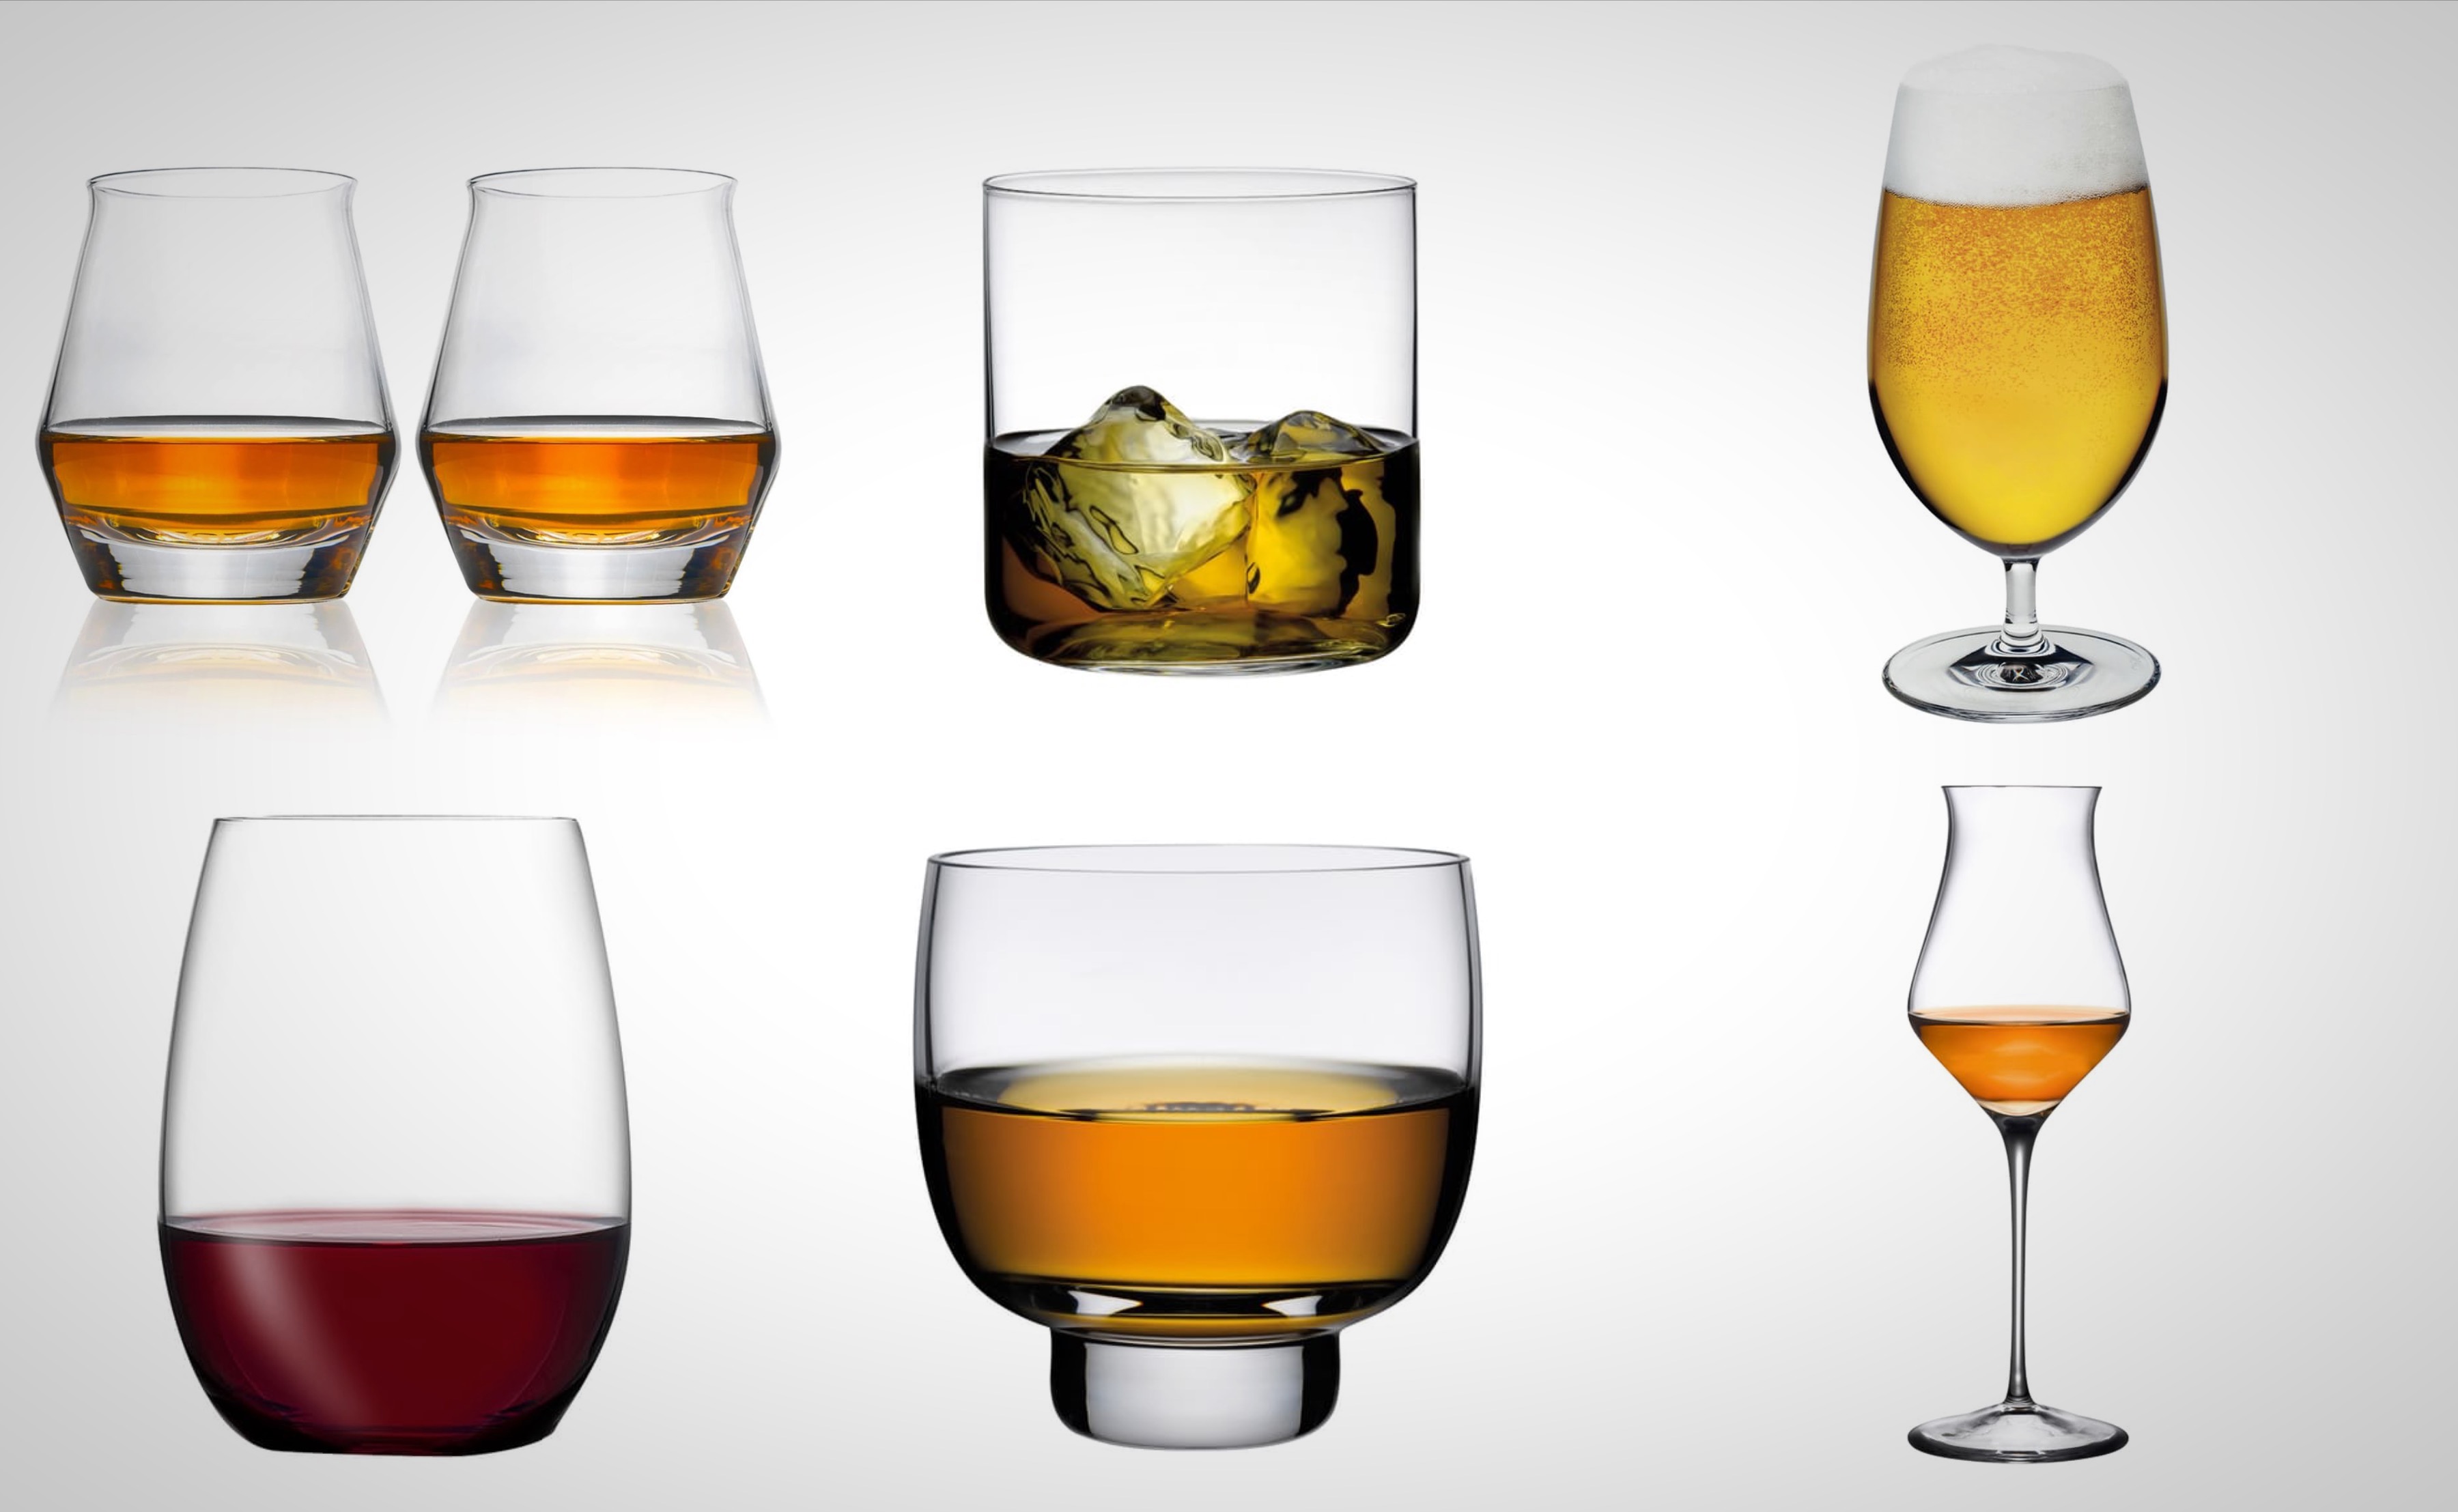 https://brobible.com/wp-content/uploads/2021/02/essentail-home-bar-glasses-whiskey-wine-beer.jpg